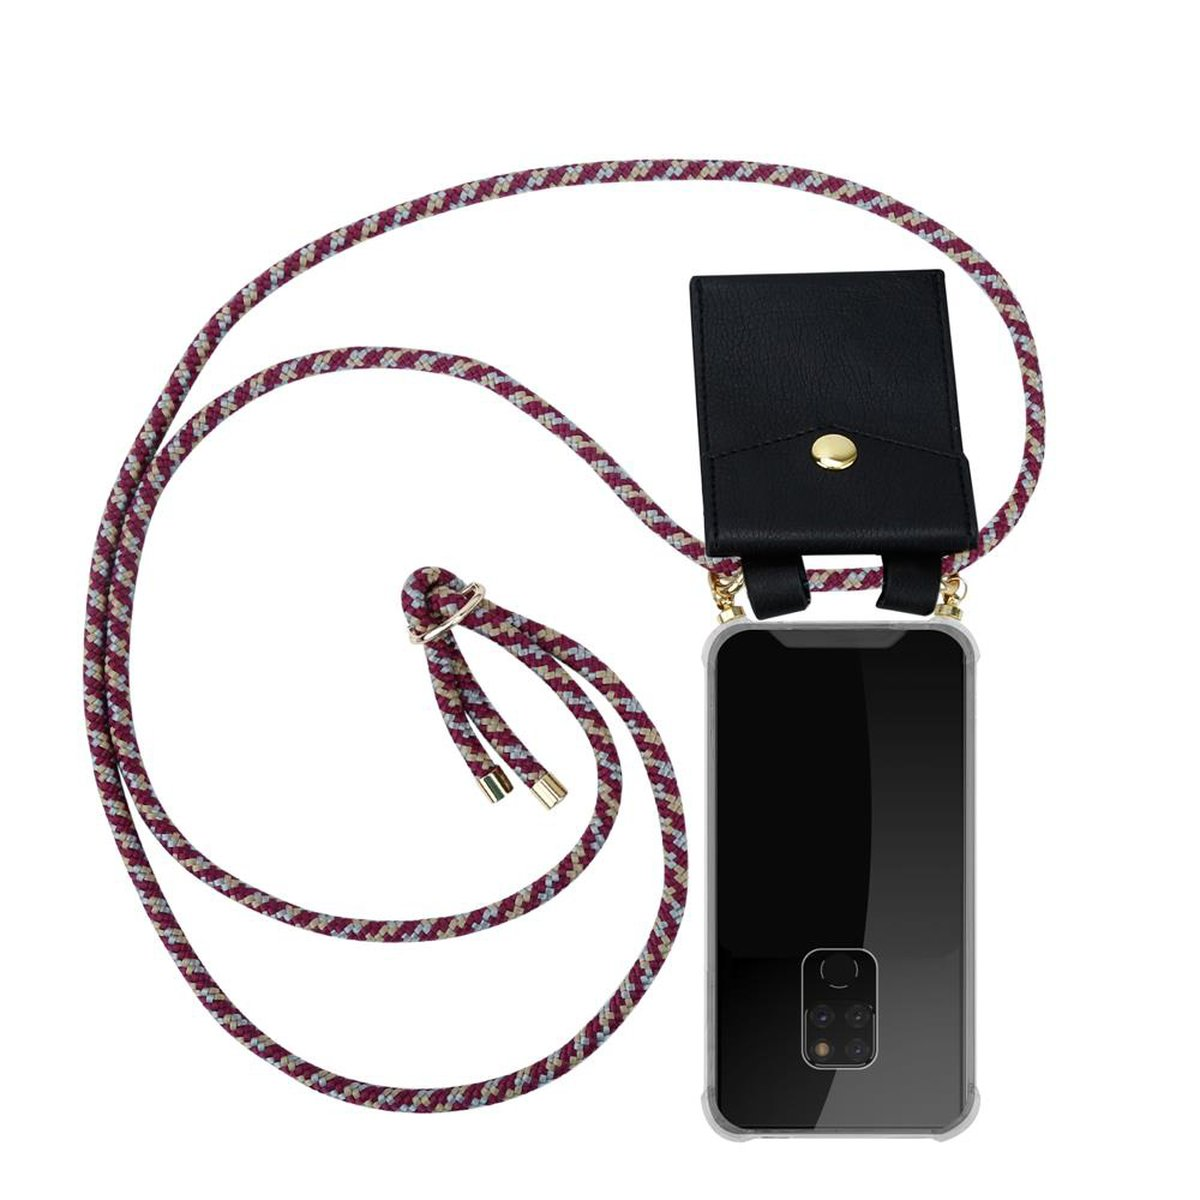 CADORABO Handy Kette mit Gold Ringen, abnehmbarer GELB Huawei, und Backcover, Hülle, 20, ROT MATE Band Kordel WEIß